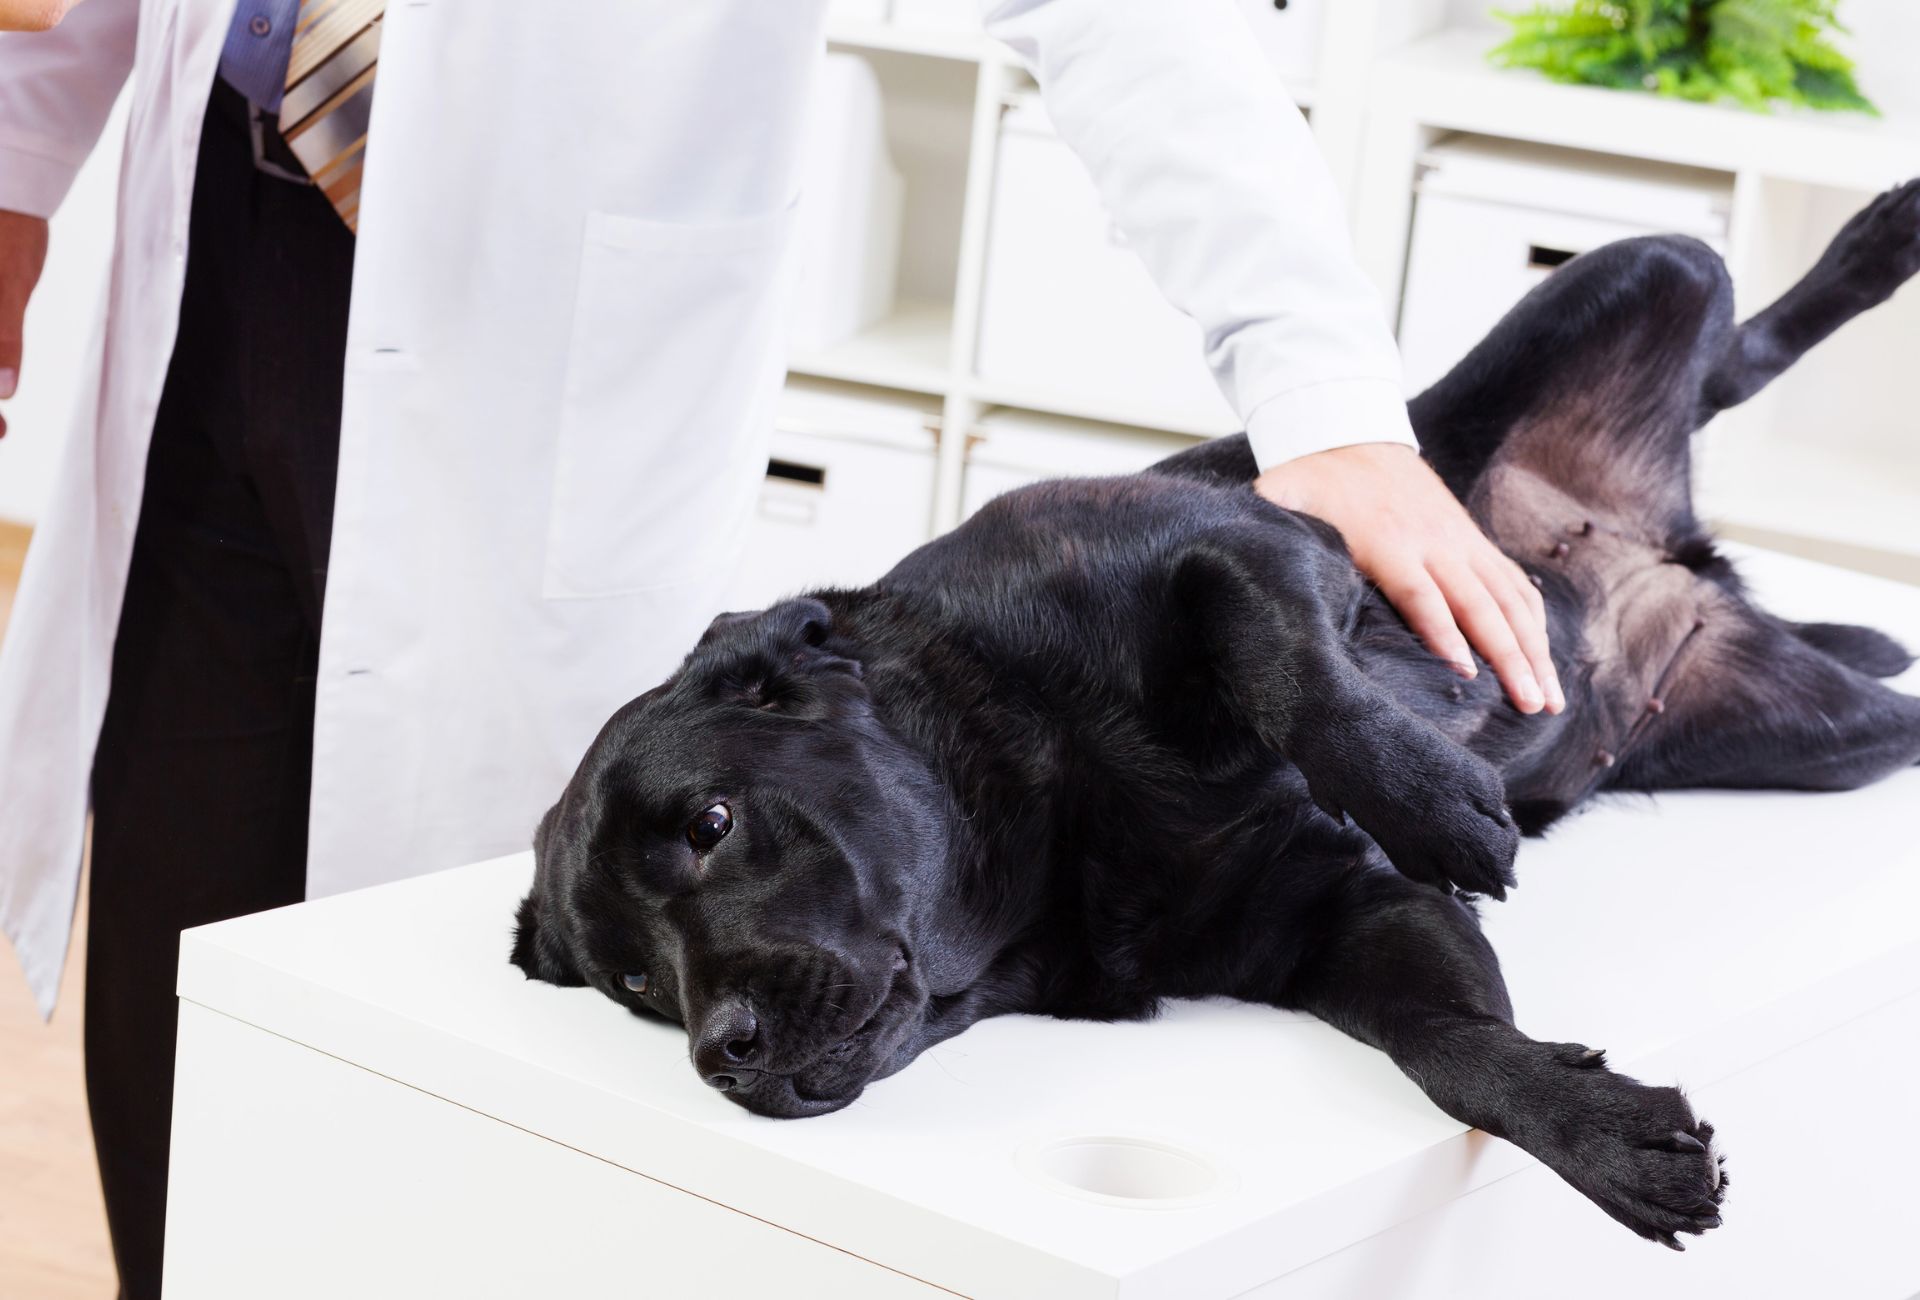 Veterinarian in white coat rubs a black Labrador's belly on a table.